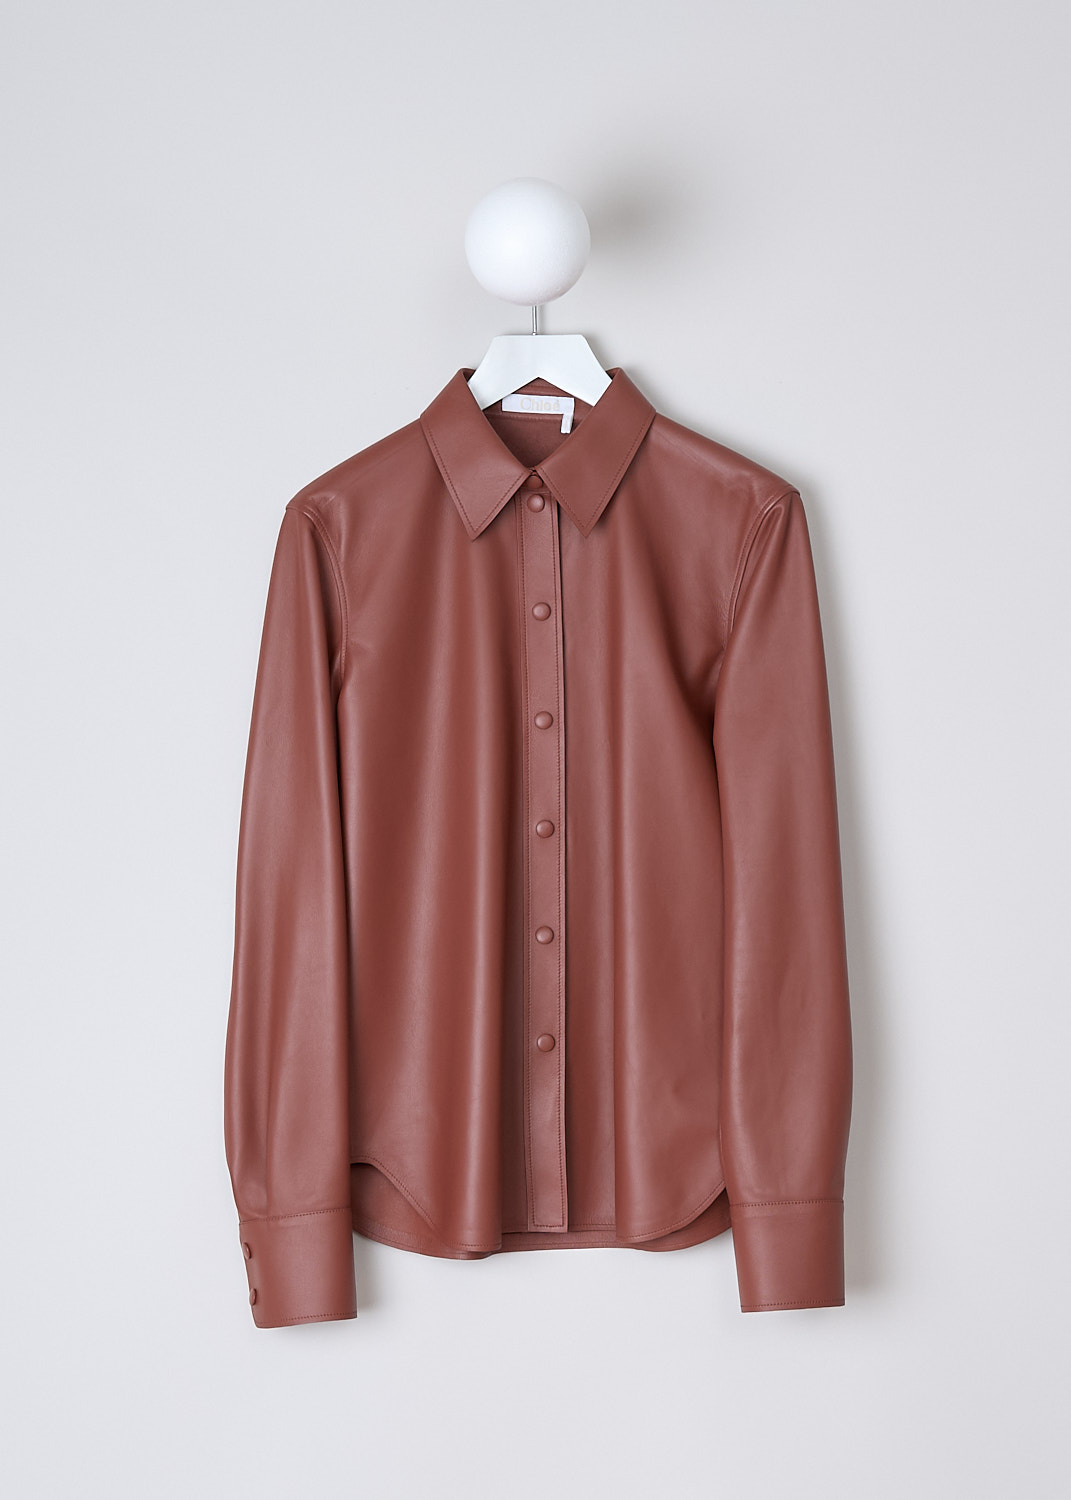 CHLOÉ, LEATHER BLOUSE IN INTENSE BROWN, CHC22SCH1620826J_INTENSE_BROWN, Brown, Front, The long sleeve leather blouse in Intense Brown has a pointed collar and a front button placket with press studs. The long sleeves have cuffs with a press stud closure. The blouse has a rounded hemline. In the back, a seam runs along the back yoke with a centre box pleat.
